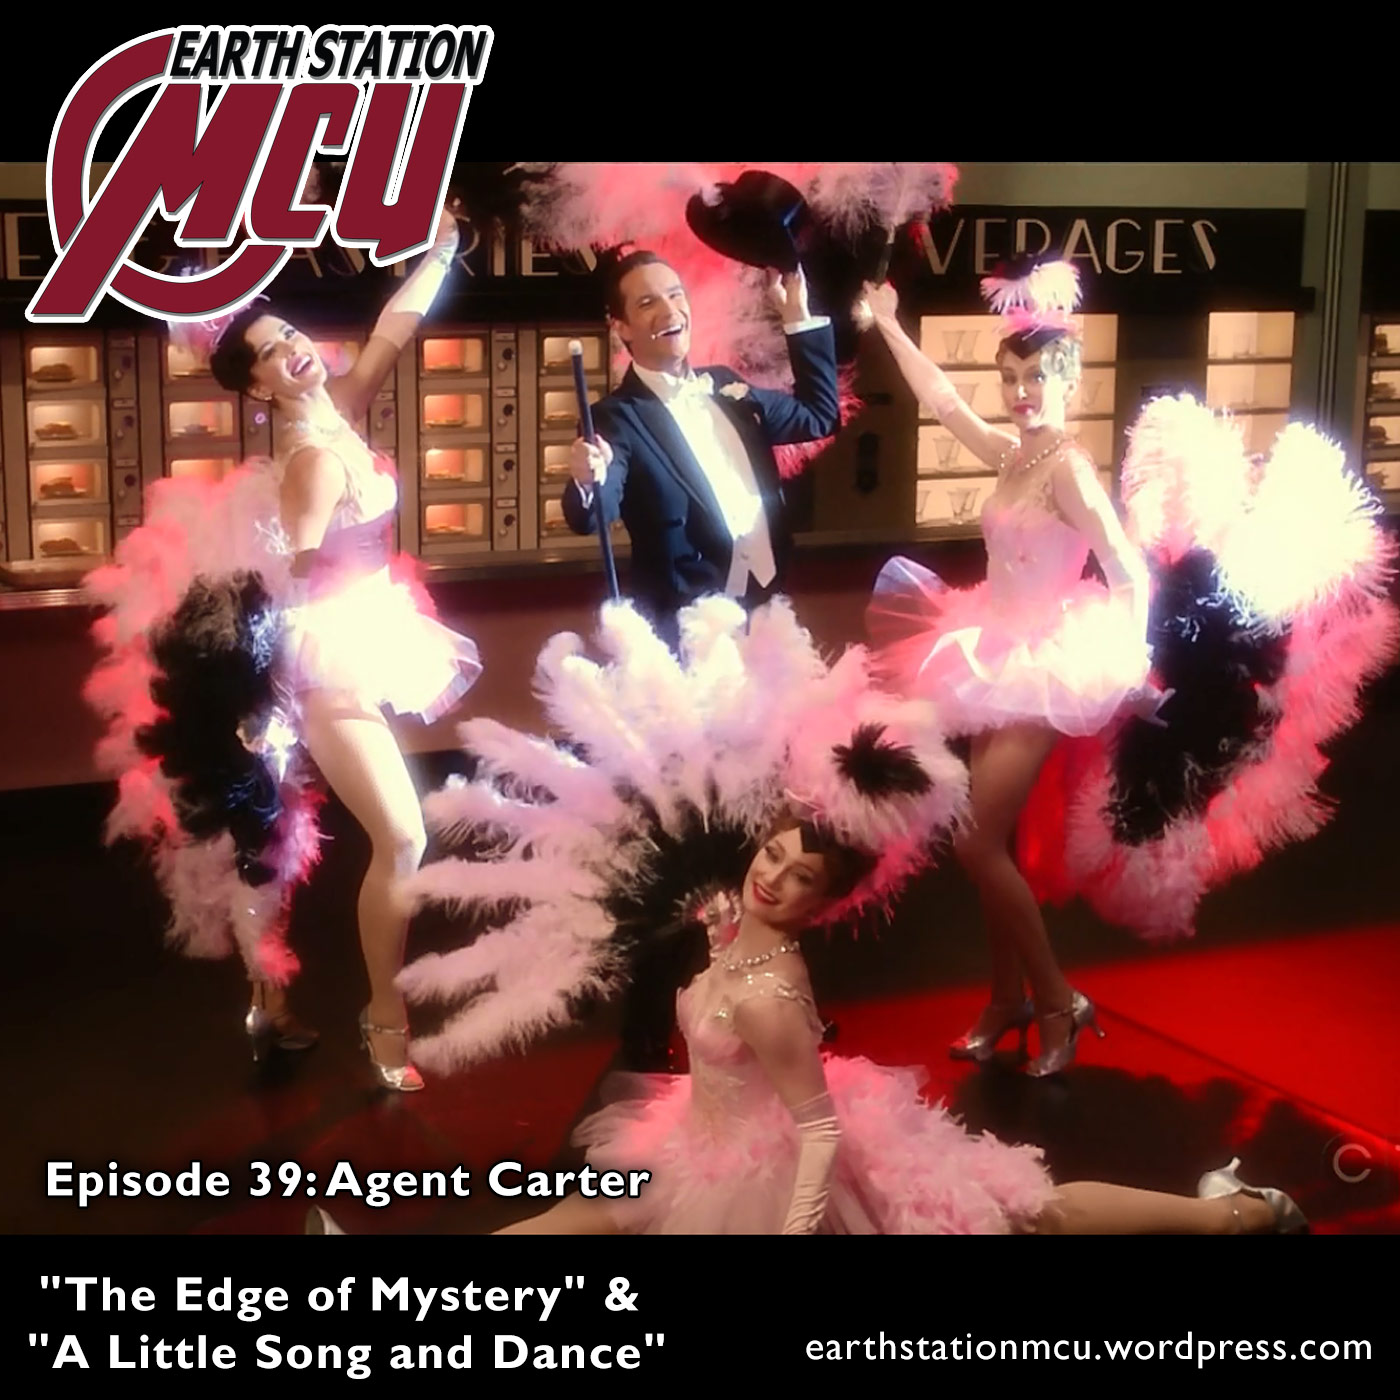 Earth Station MCU: Episode 39  - Agent Carter, "The Edge of Mystery" and "A Little Song and Dance"